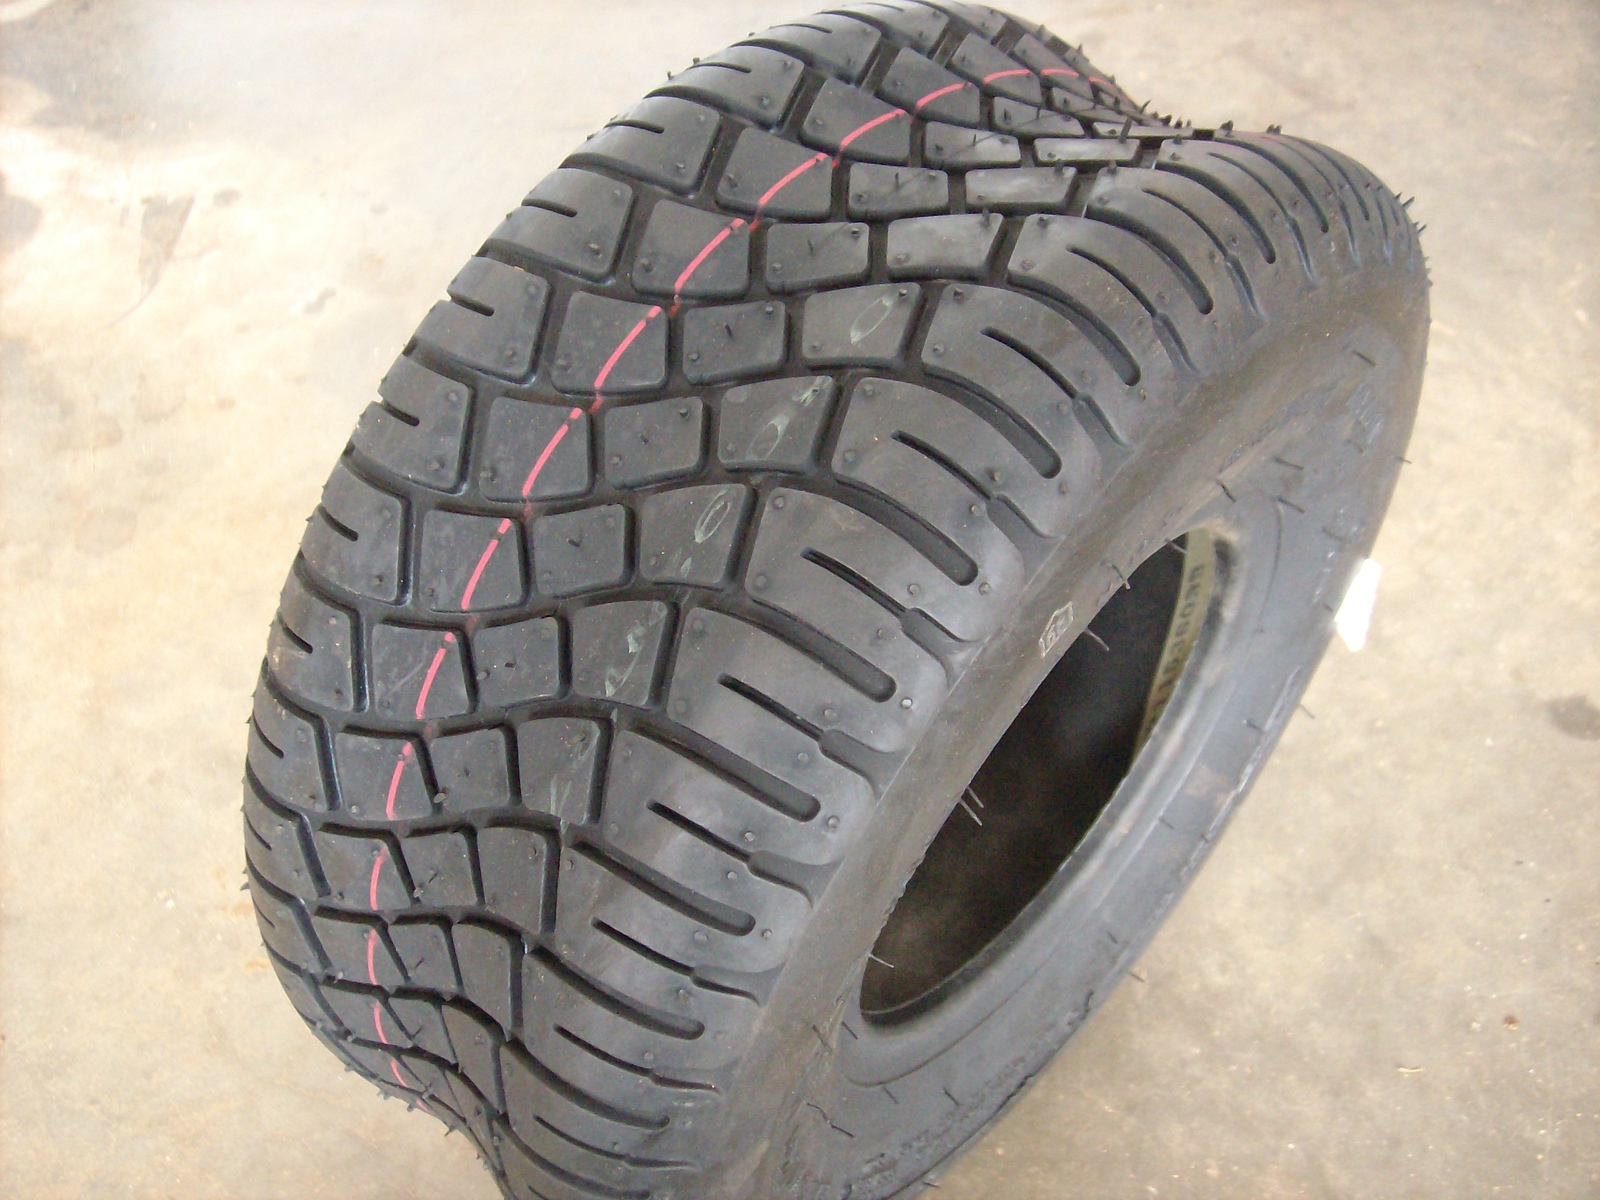 Tire 15x6.00-6, 4 Ply, Heavy Duty Tubeless for Lawn Mower, 160-505